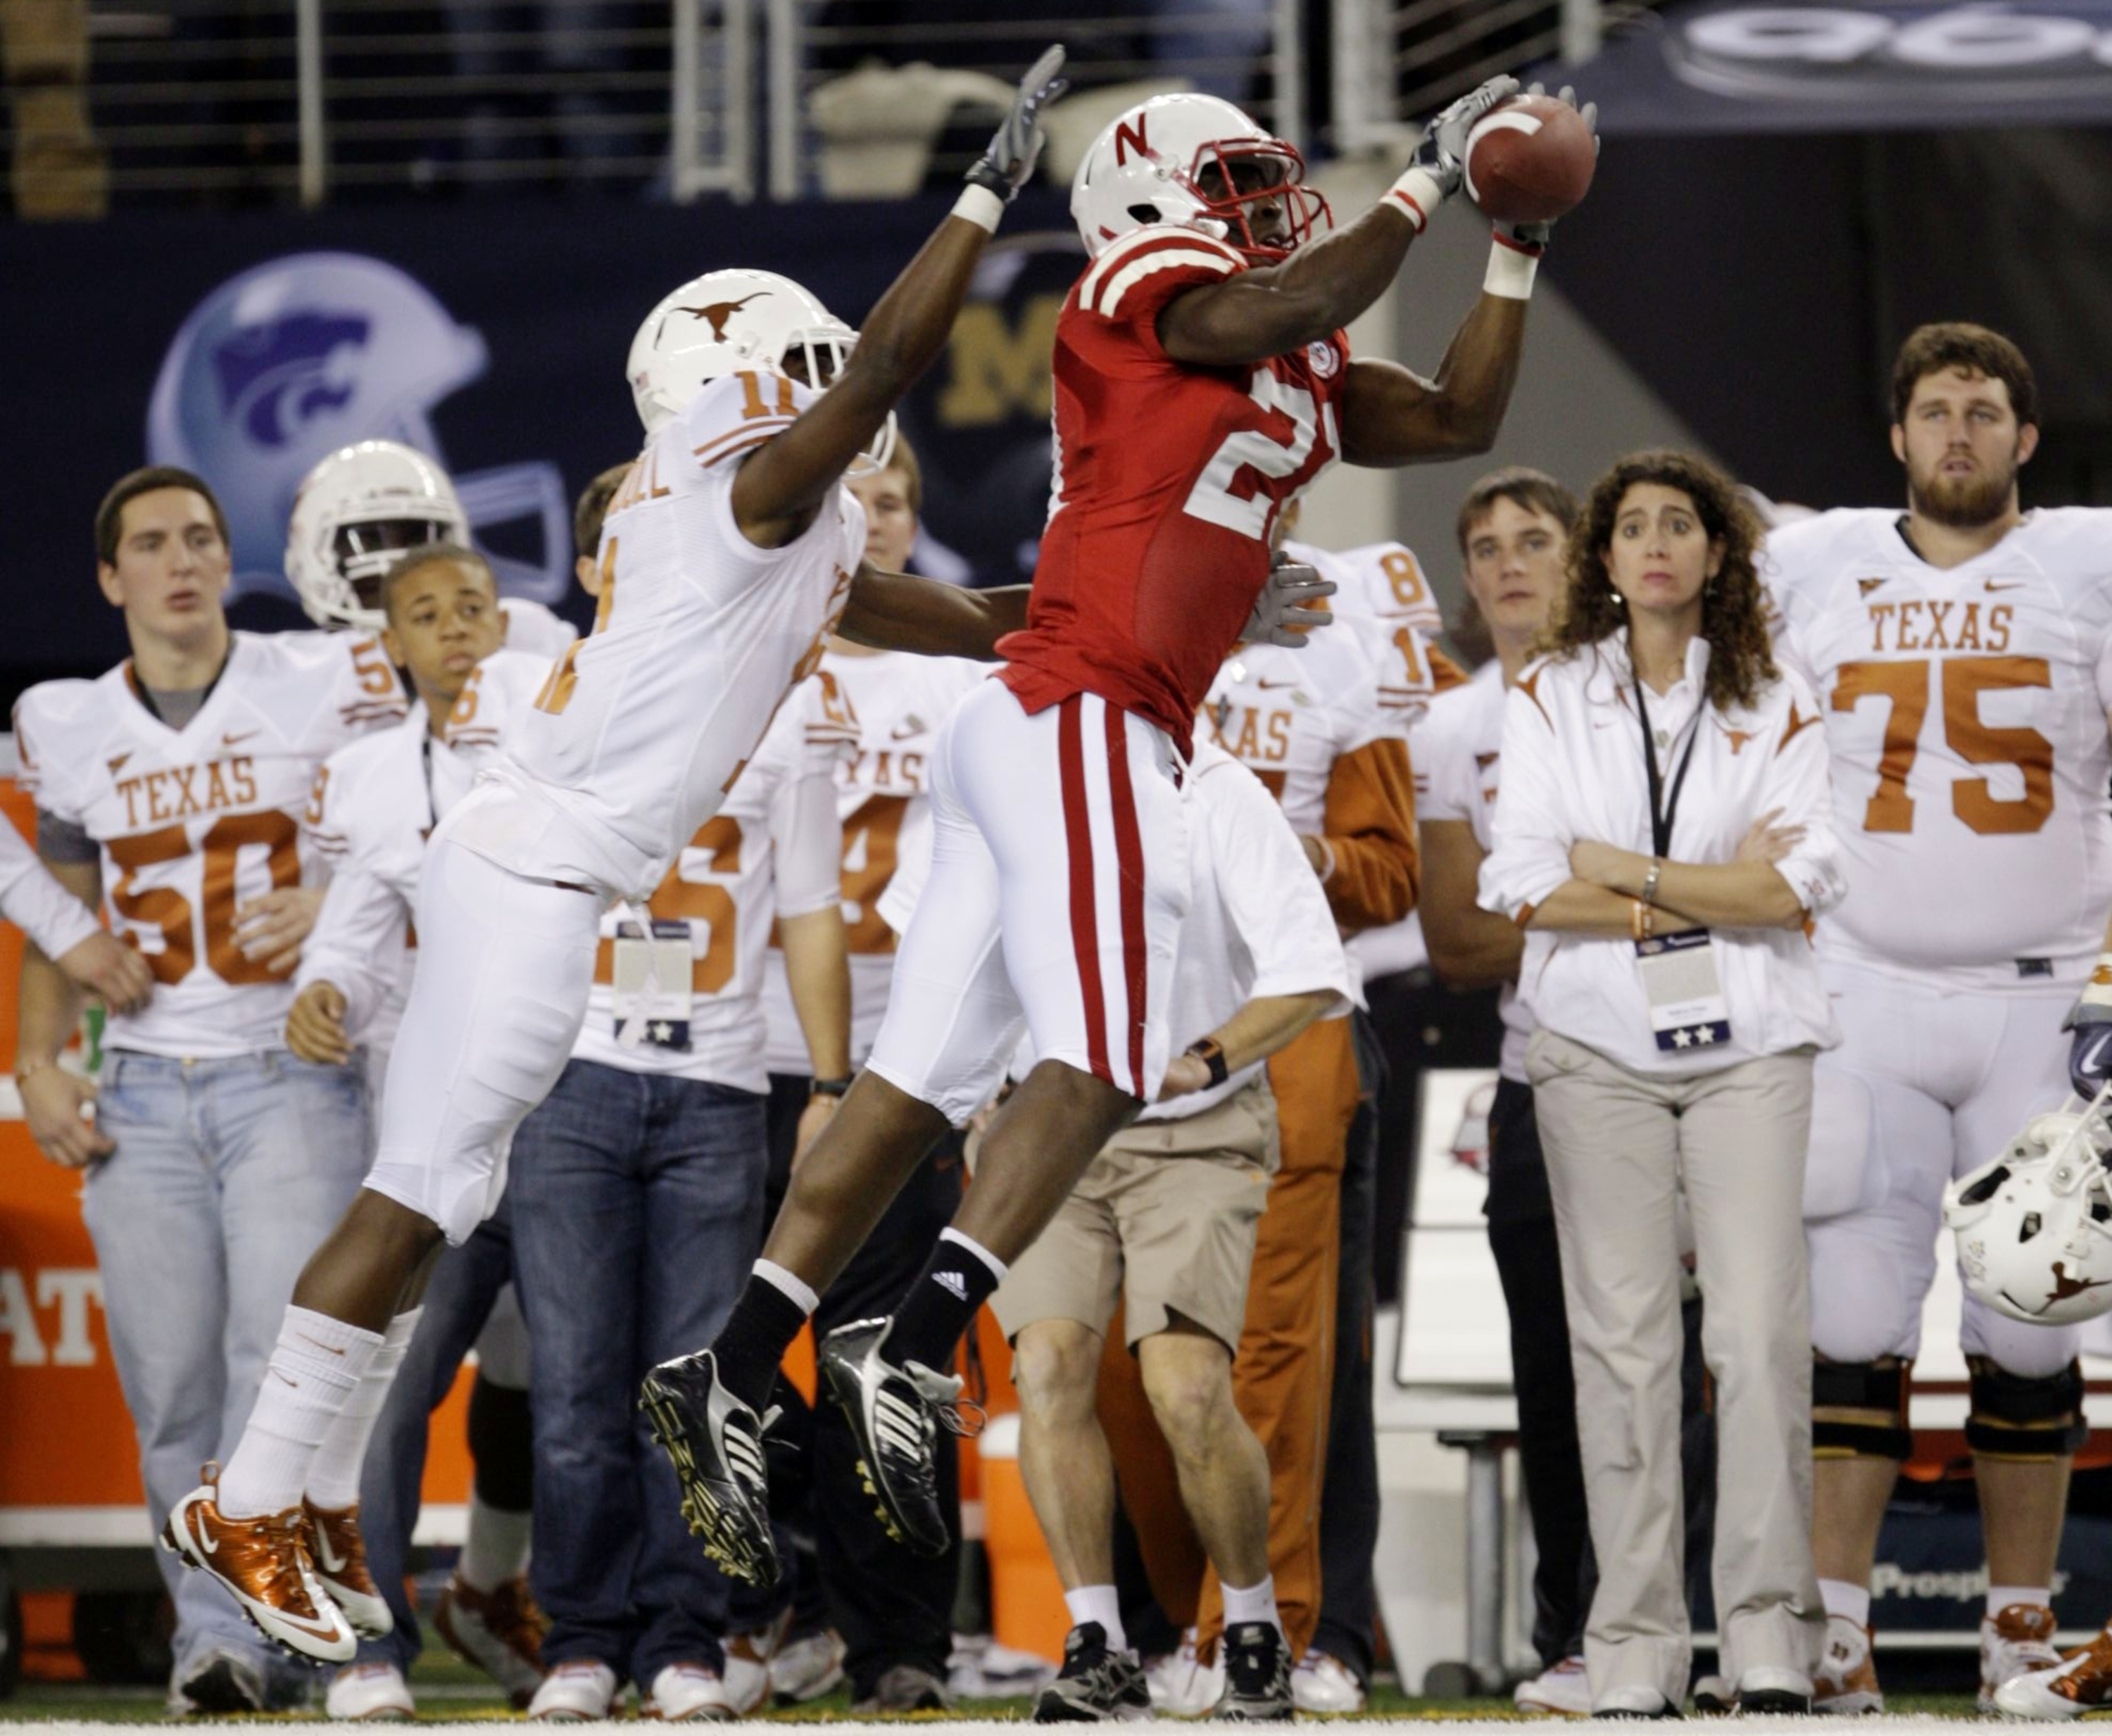 ARLINGTON, TX - DECEMBER 5:  Prince Amukamara #21 of the Nebraska Cornhuskers catches the ball for an interception in the first quarter in front of James Kirkendoll #11 of the Texas Longhorns at Cowboys Stadium on December 5, 2009 in Arlington, Texas. (Ph